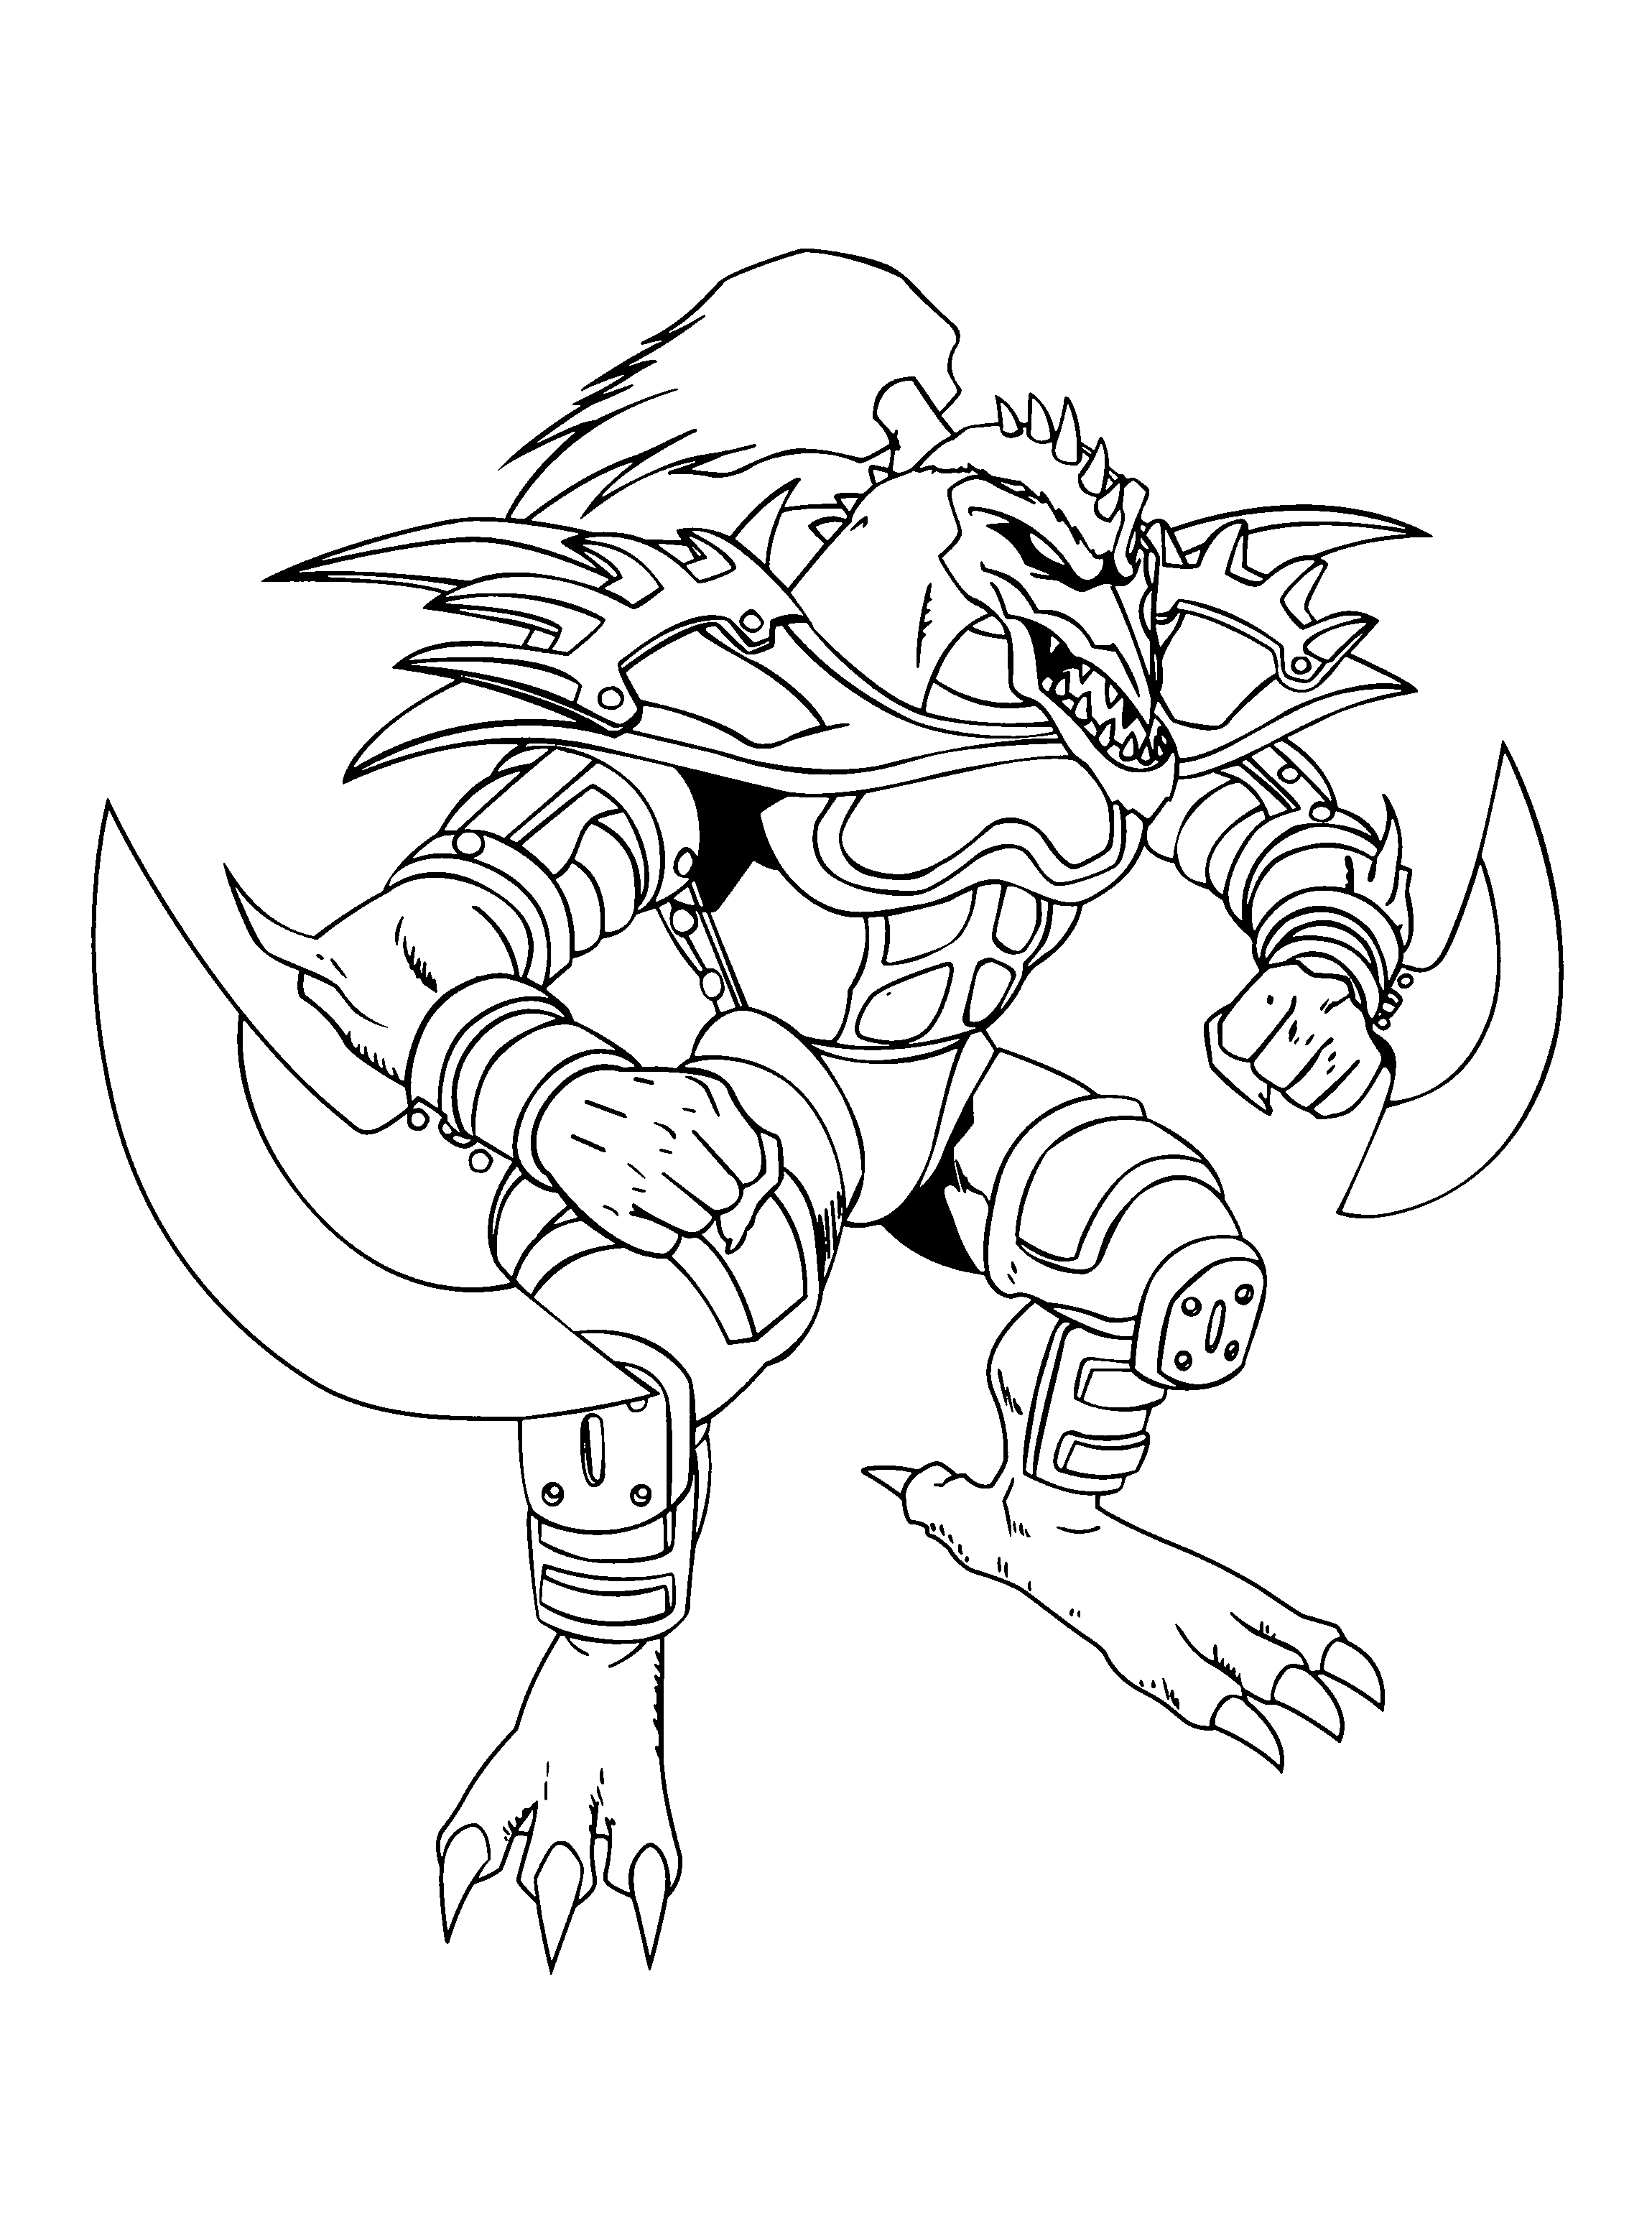 yugioh free coloring pages - photo #22